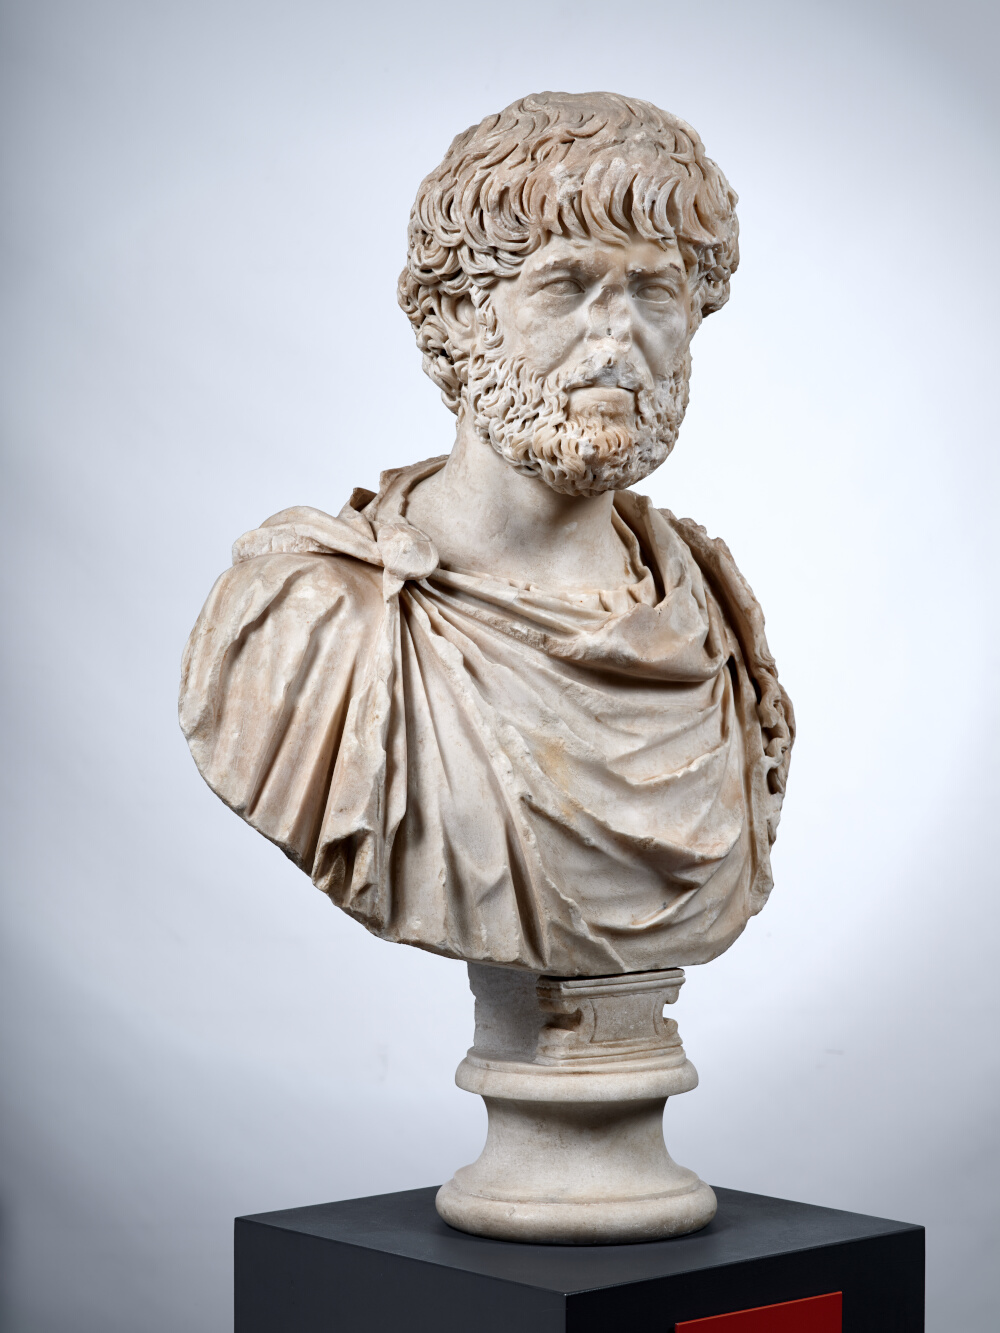 Bust of a high-ranking official of the Empire wearing a fringed paludamentum